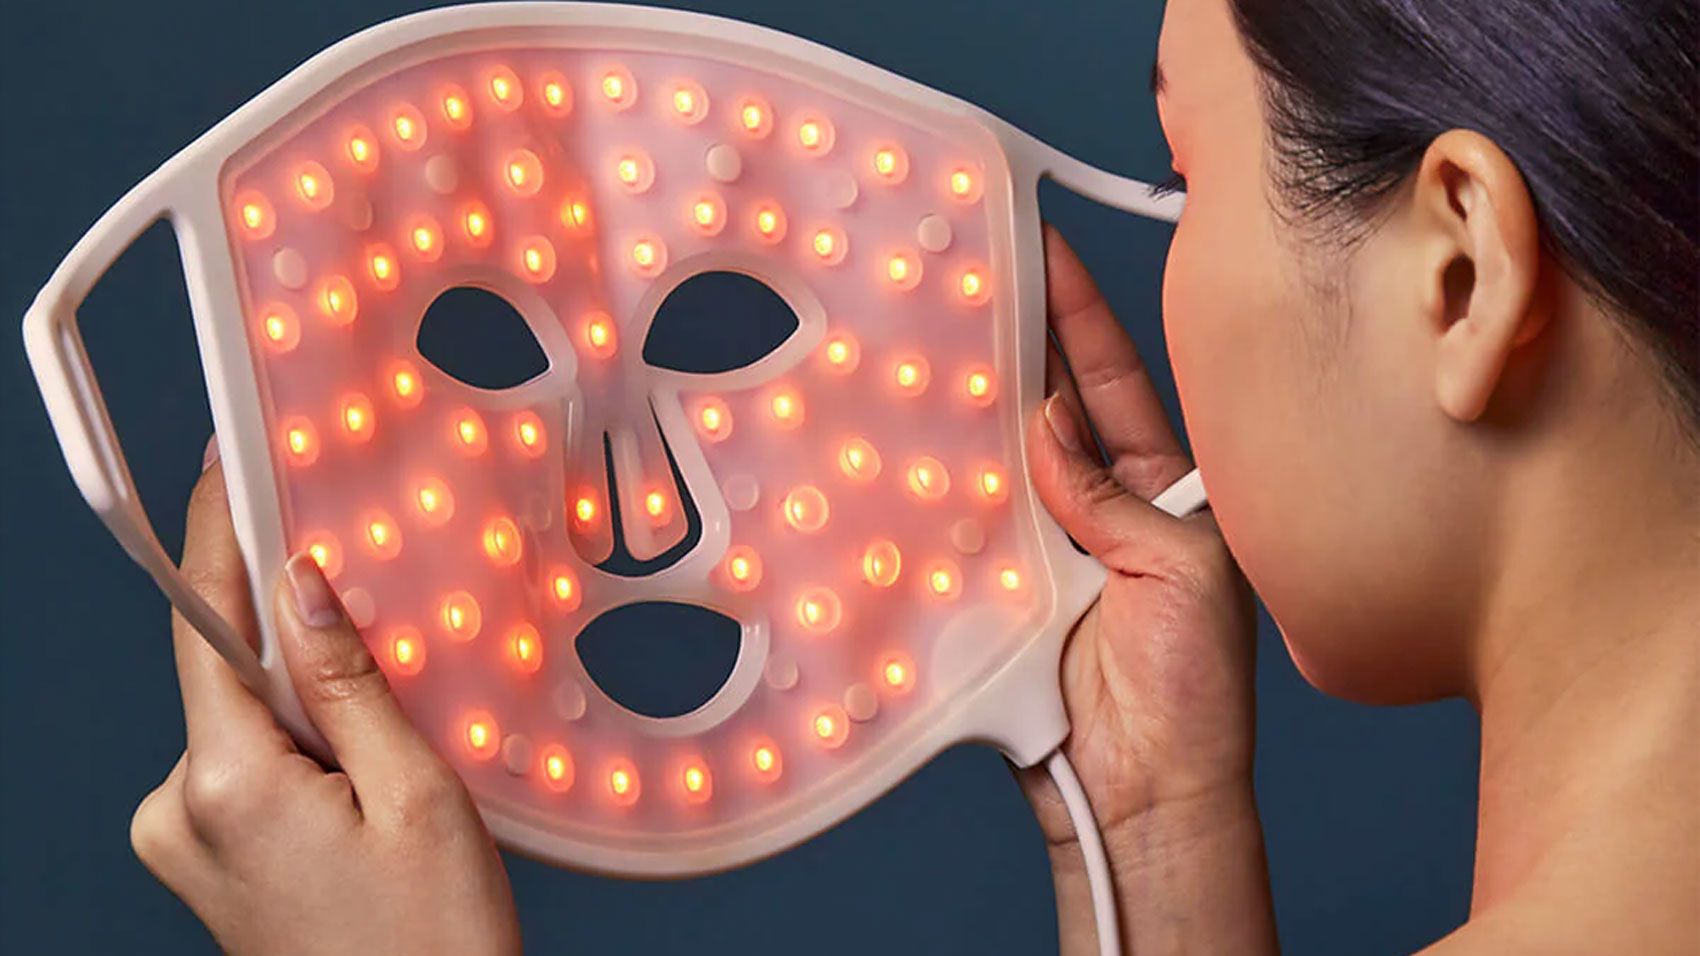 Learn about Red Light Therapy